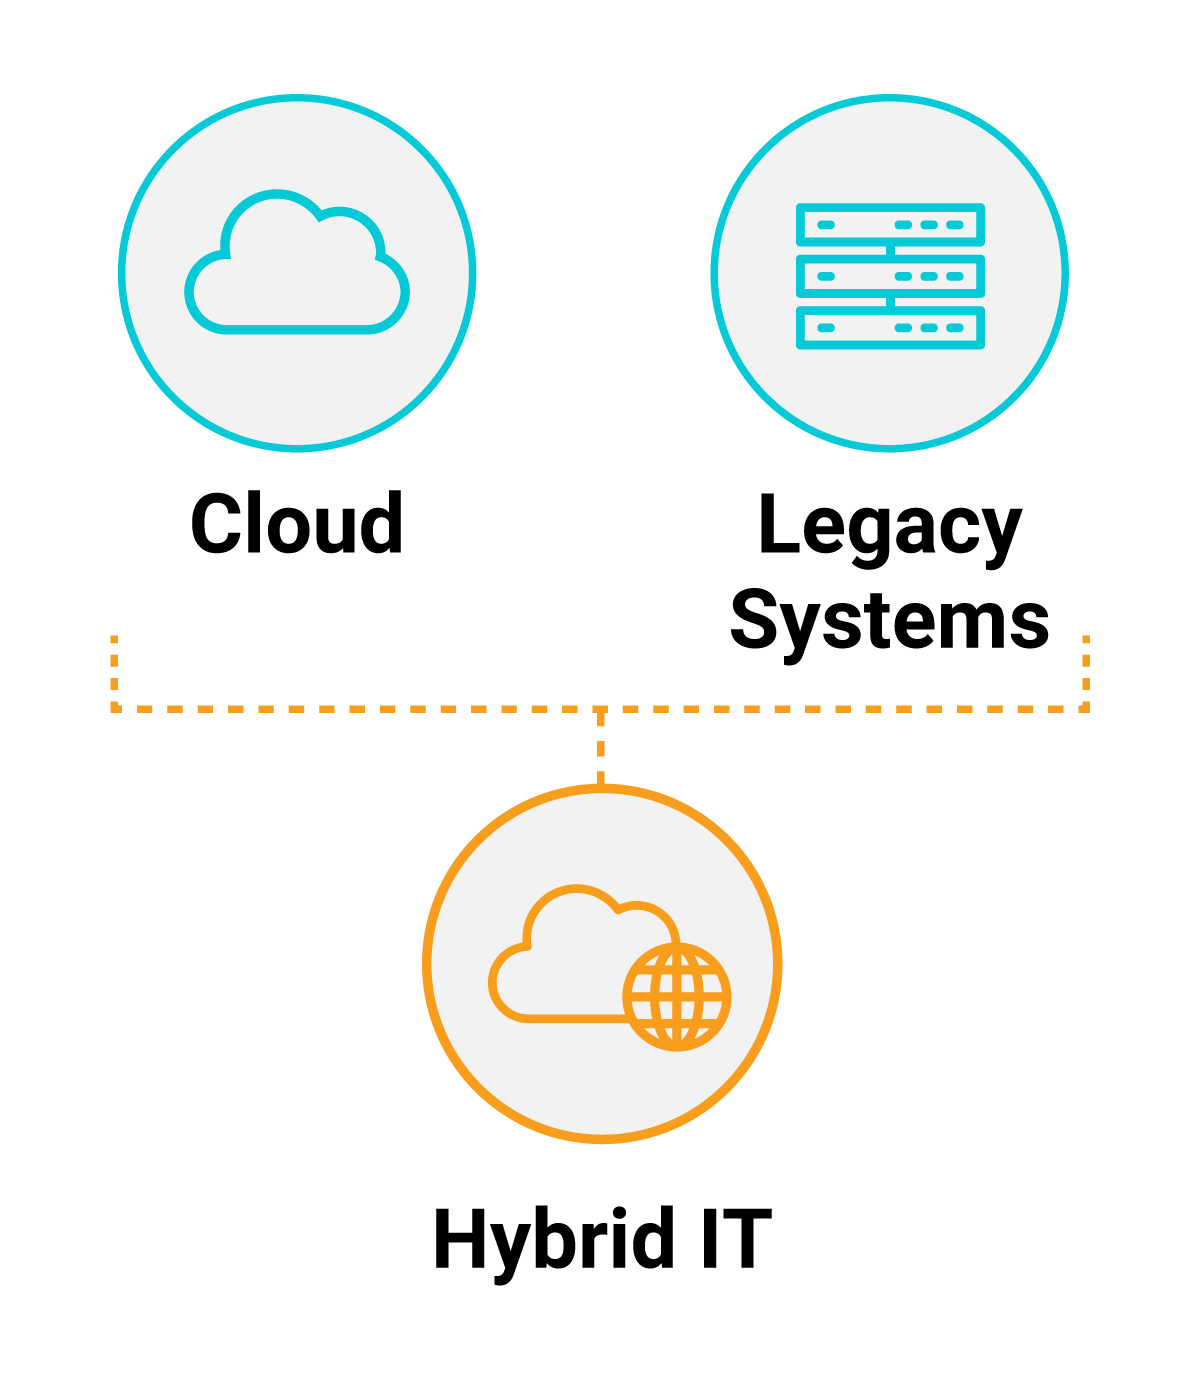 Cloud and legacy systems for hybrid IT